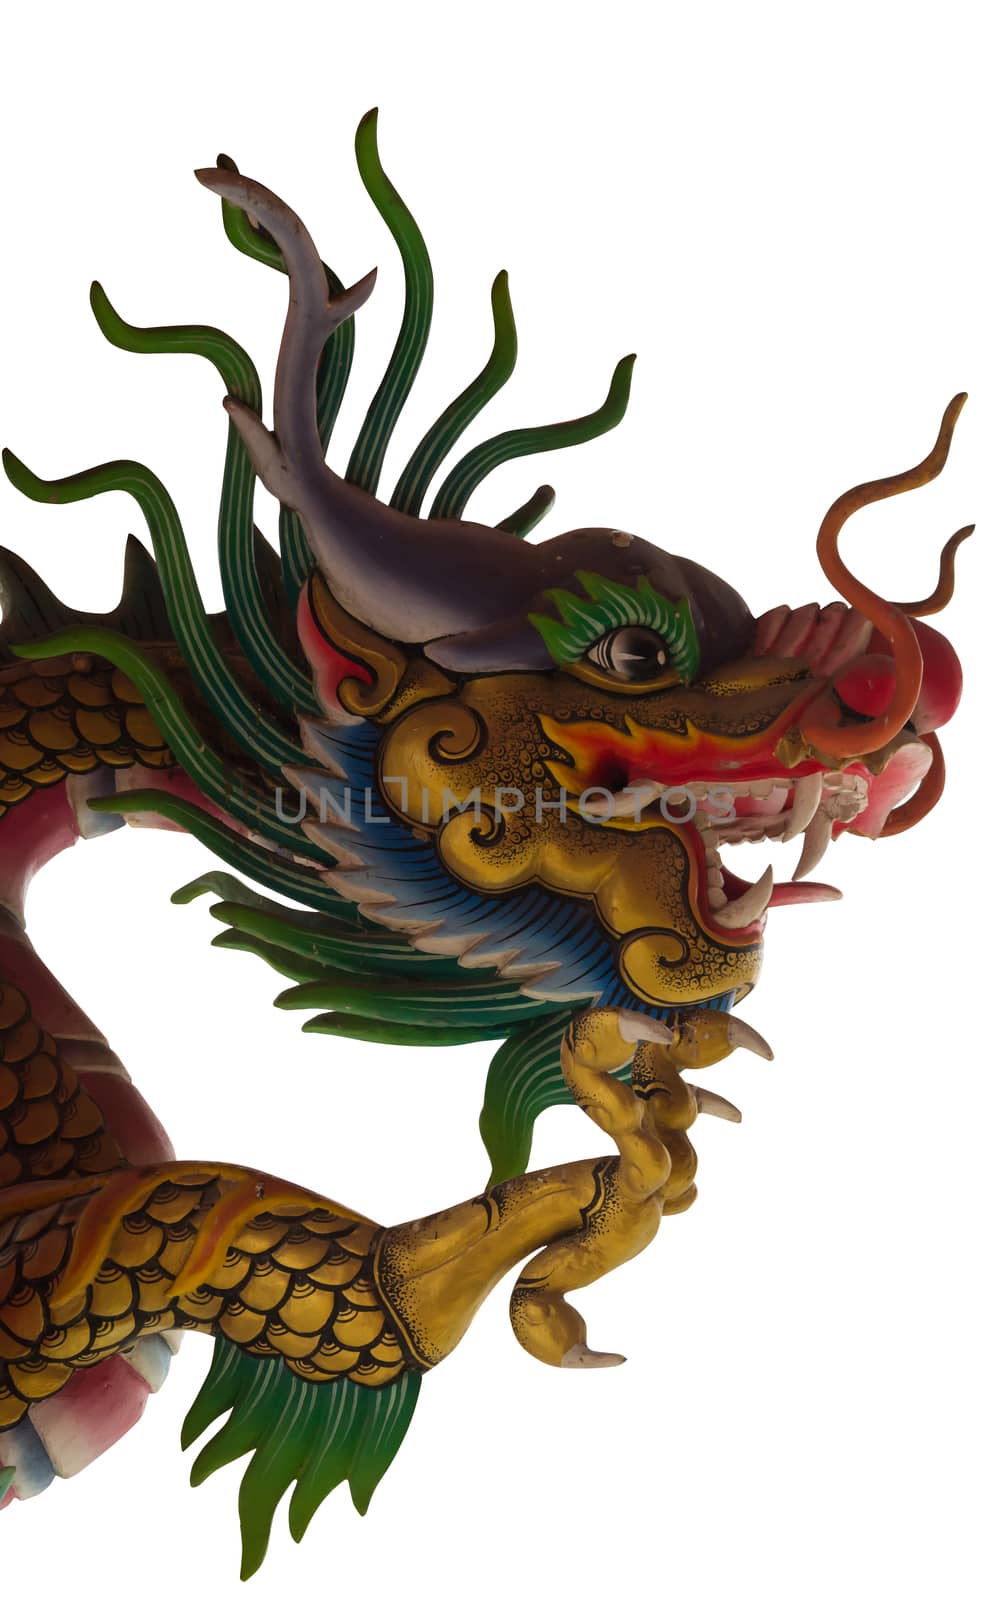 Dragon statue on white background. by nikonlike